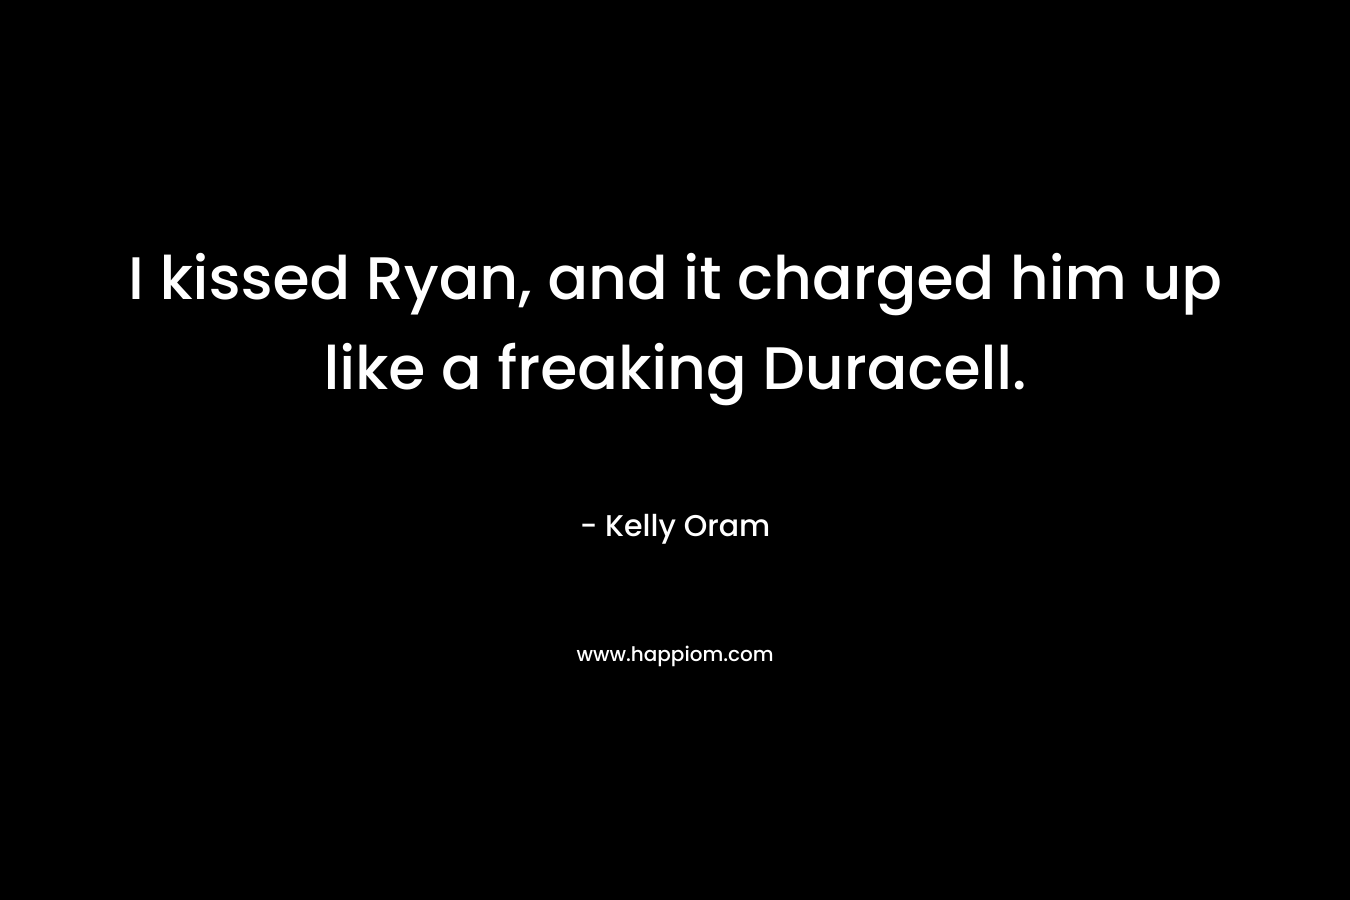 I kissed Ryan, and it charged him up like a freaking Duracell. – Kelly Oram